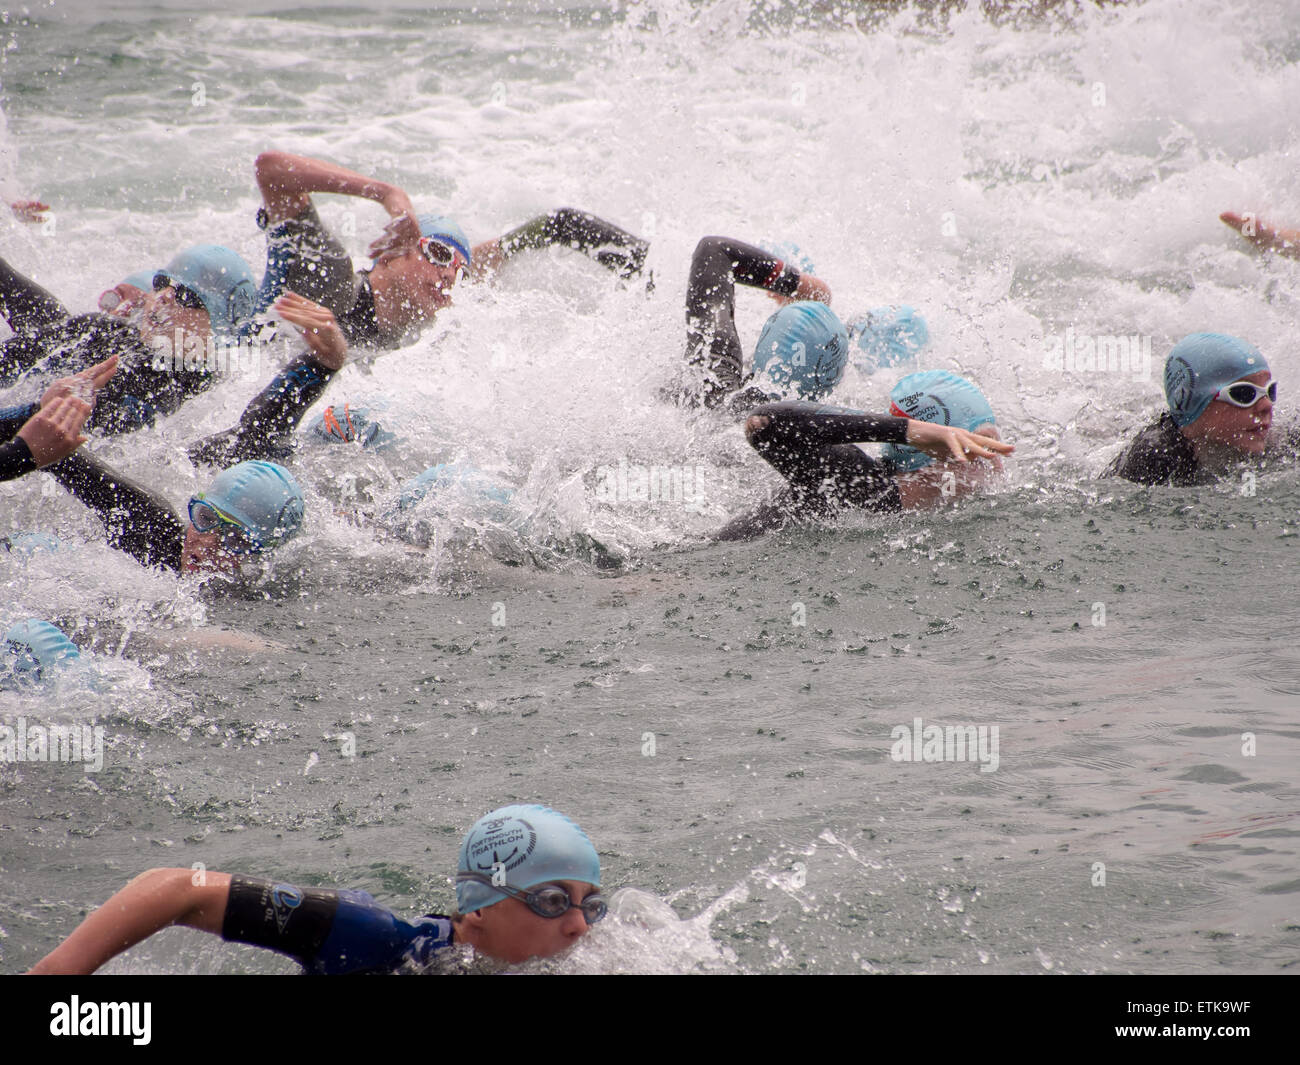 Portsmouth, UK. 14th June, 2015. Participants in the under 16 triathlon start their event with a swim in the Solent during the Portsmouth Try a tri triathlon. The event consisted of a number of sprint triathlons of different lengths to accomodate differing abilities. Credit:  simon evans/Alamy Live News Stock Photo